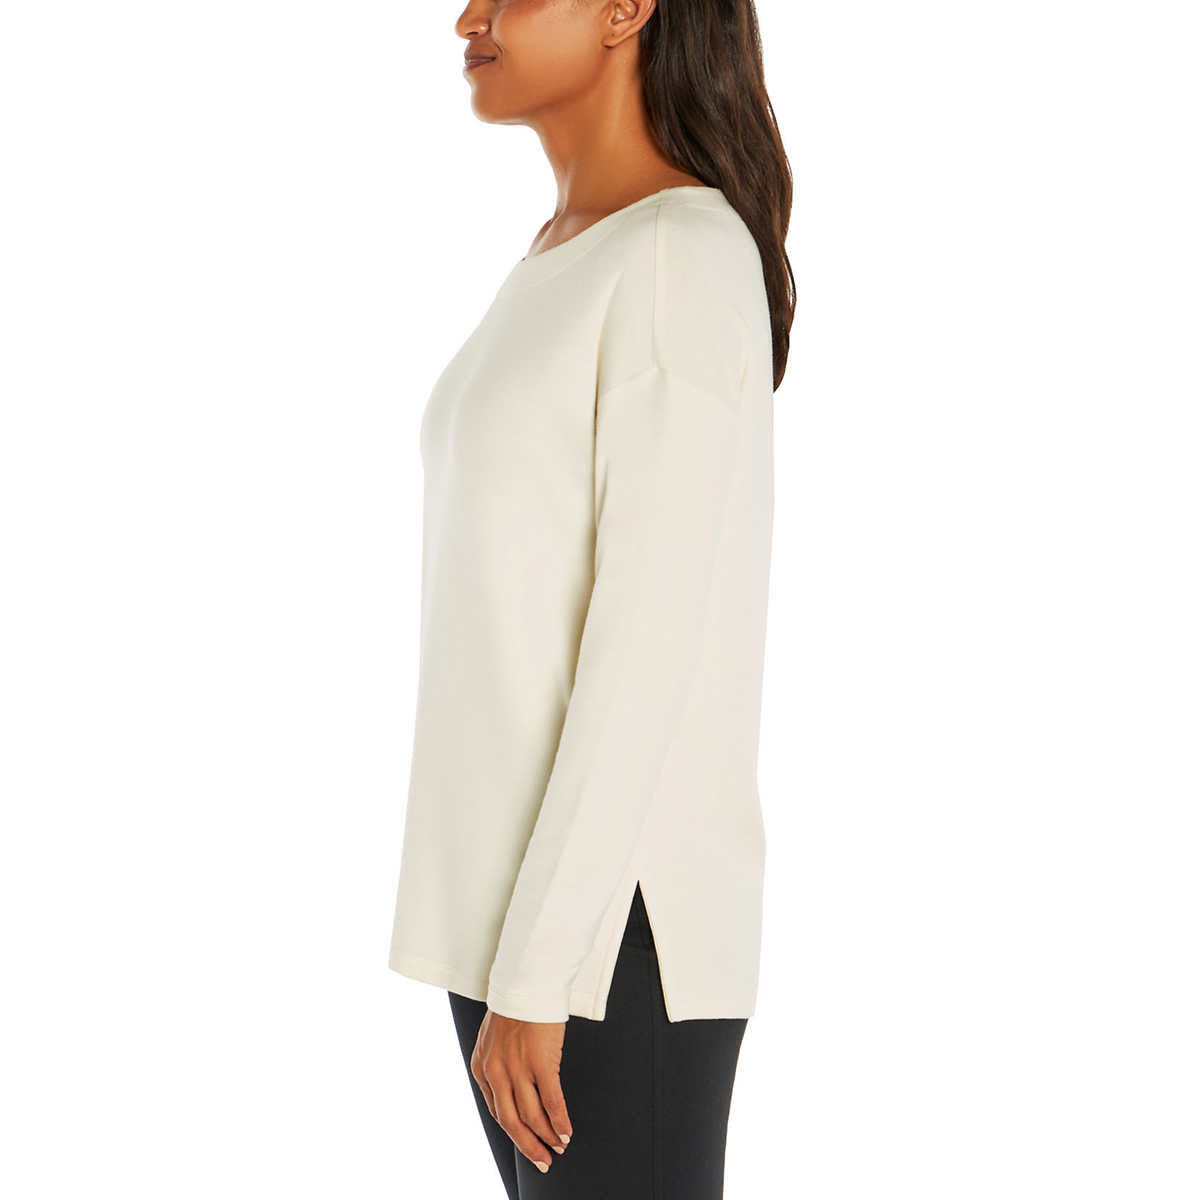 Banana Republic Women's Soft French Terry Relaxed Fit Crewneck Top